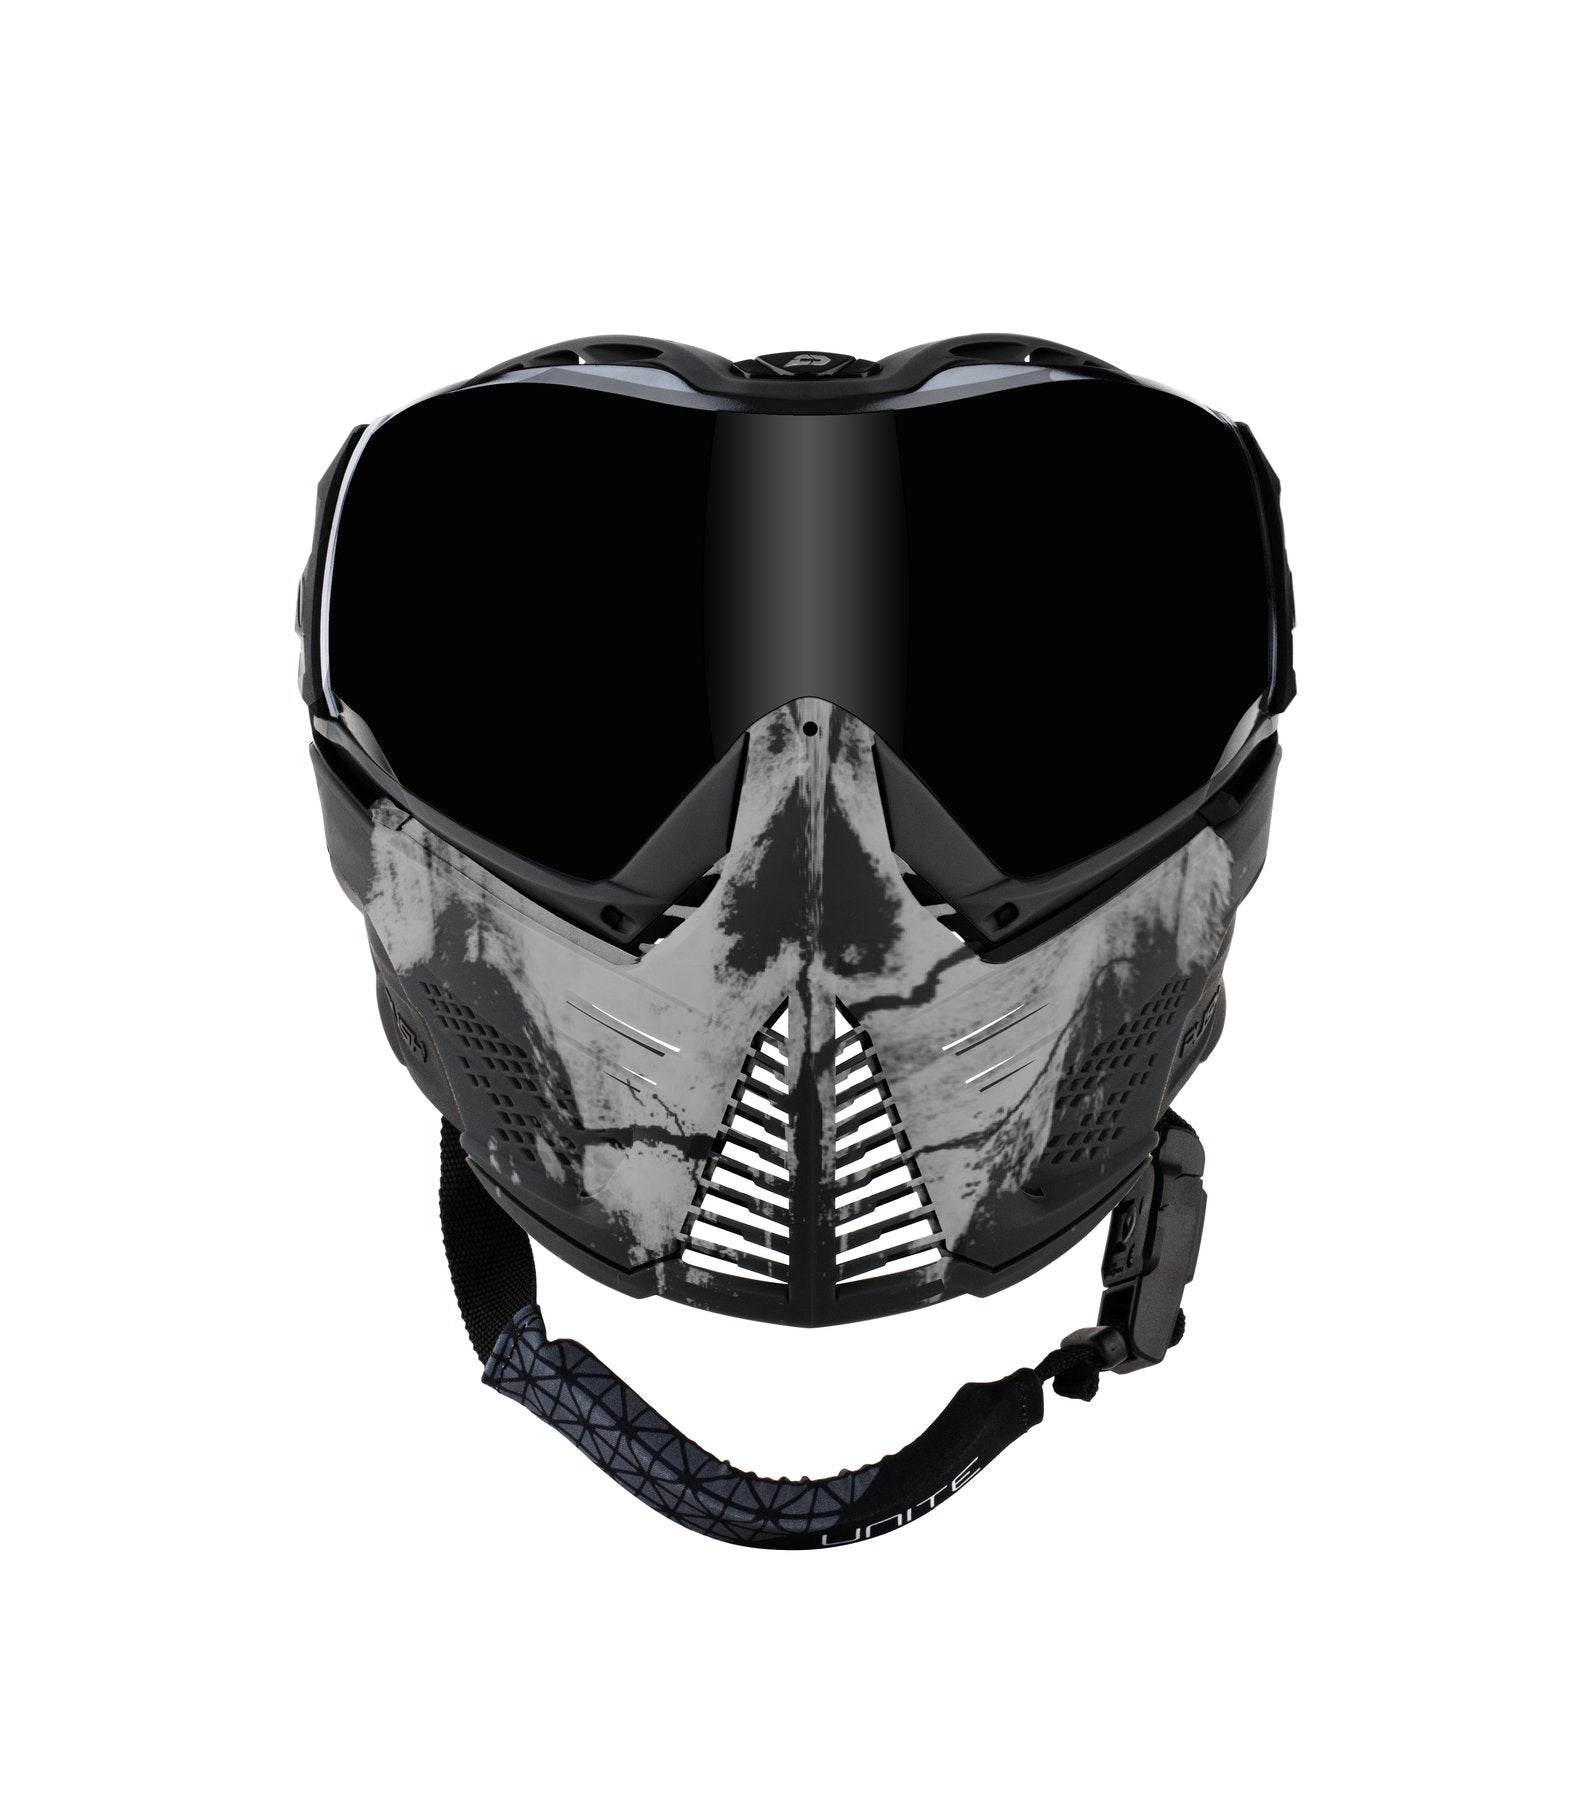 Push Unite Goggles - Infamous White Skull - Eminent Paintball And Airsoft